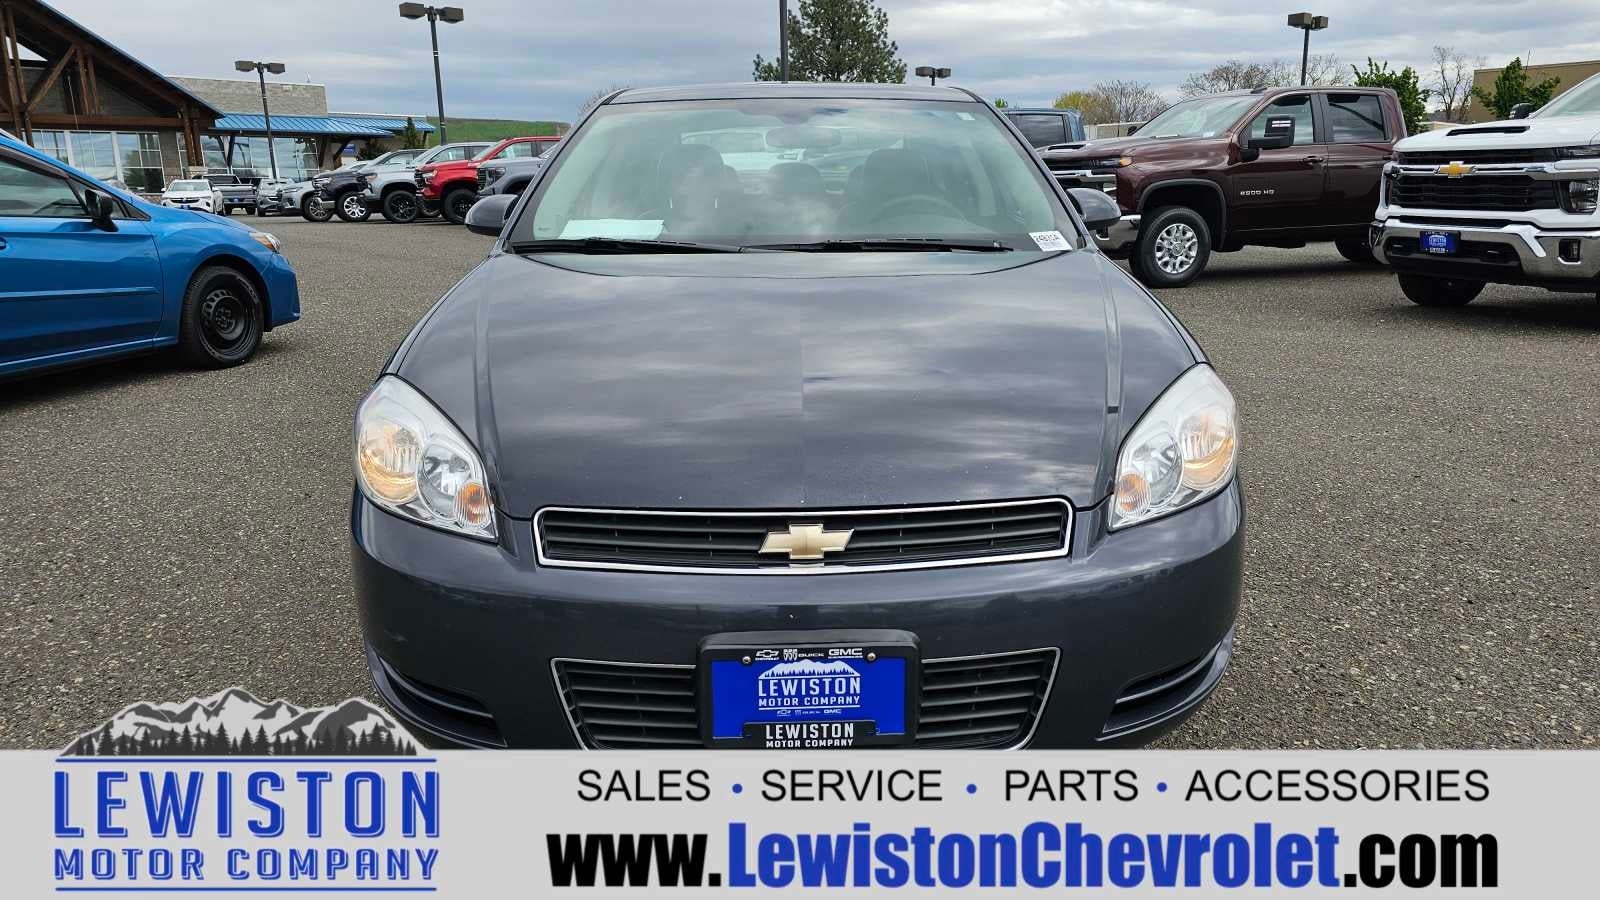 Used 2008 Chevrolet Impala LT with VIN 2G1WT58N481292856 for sale in Lewiston, ID